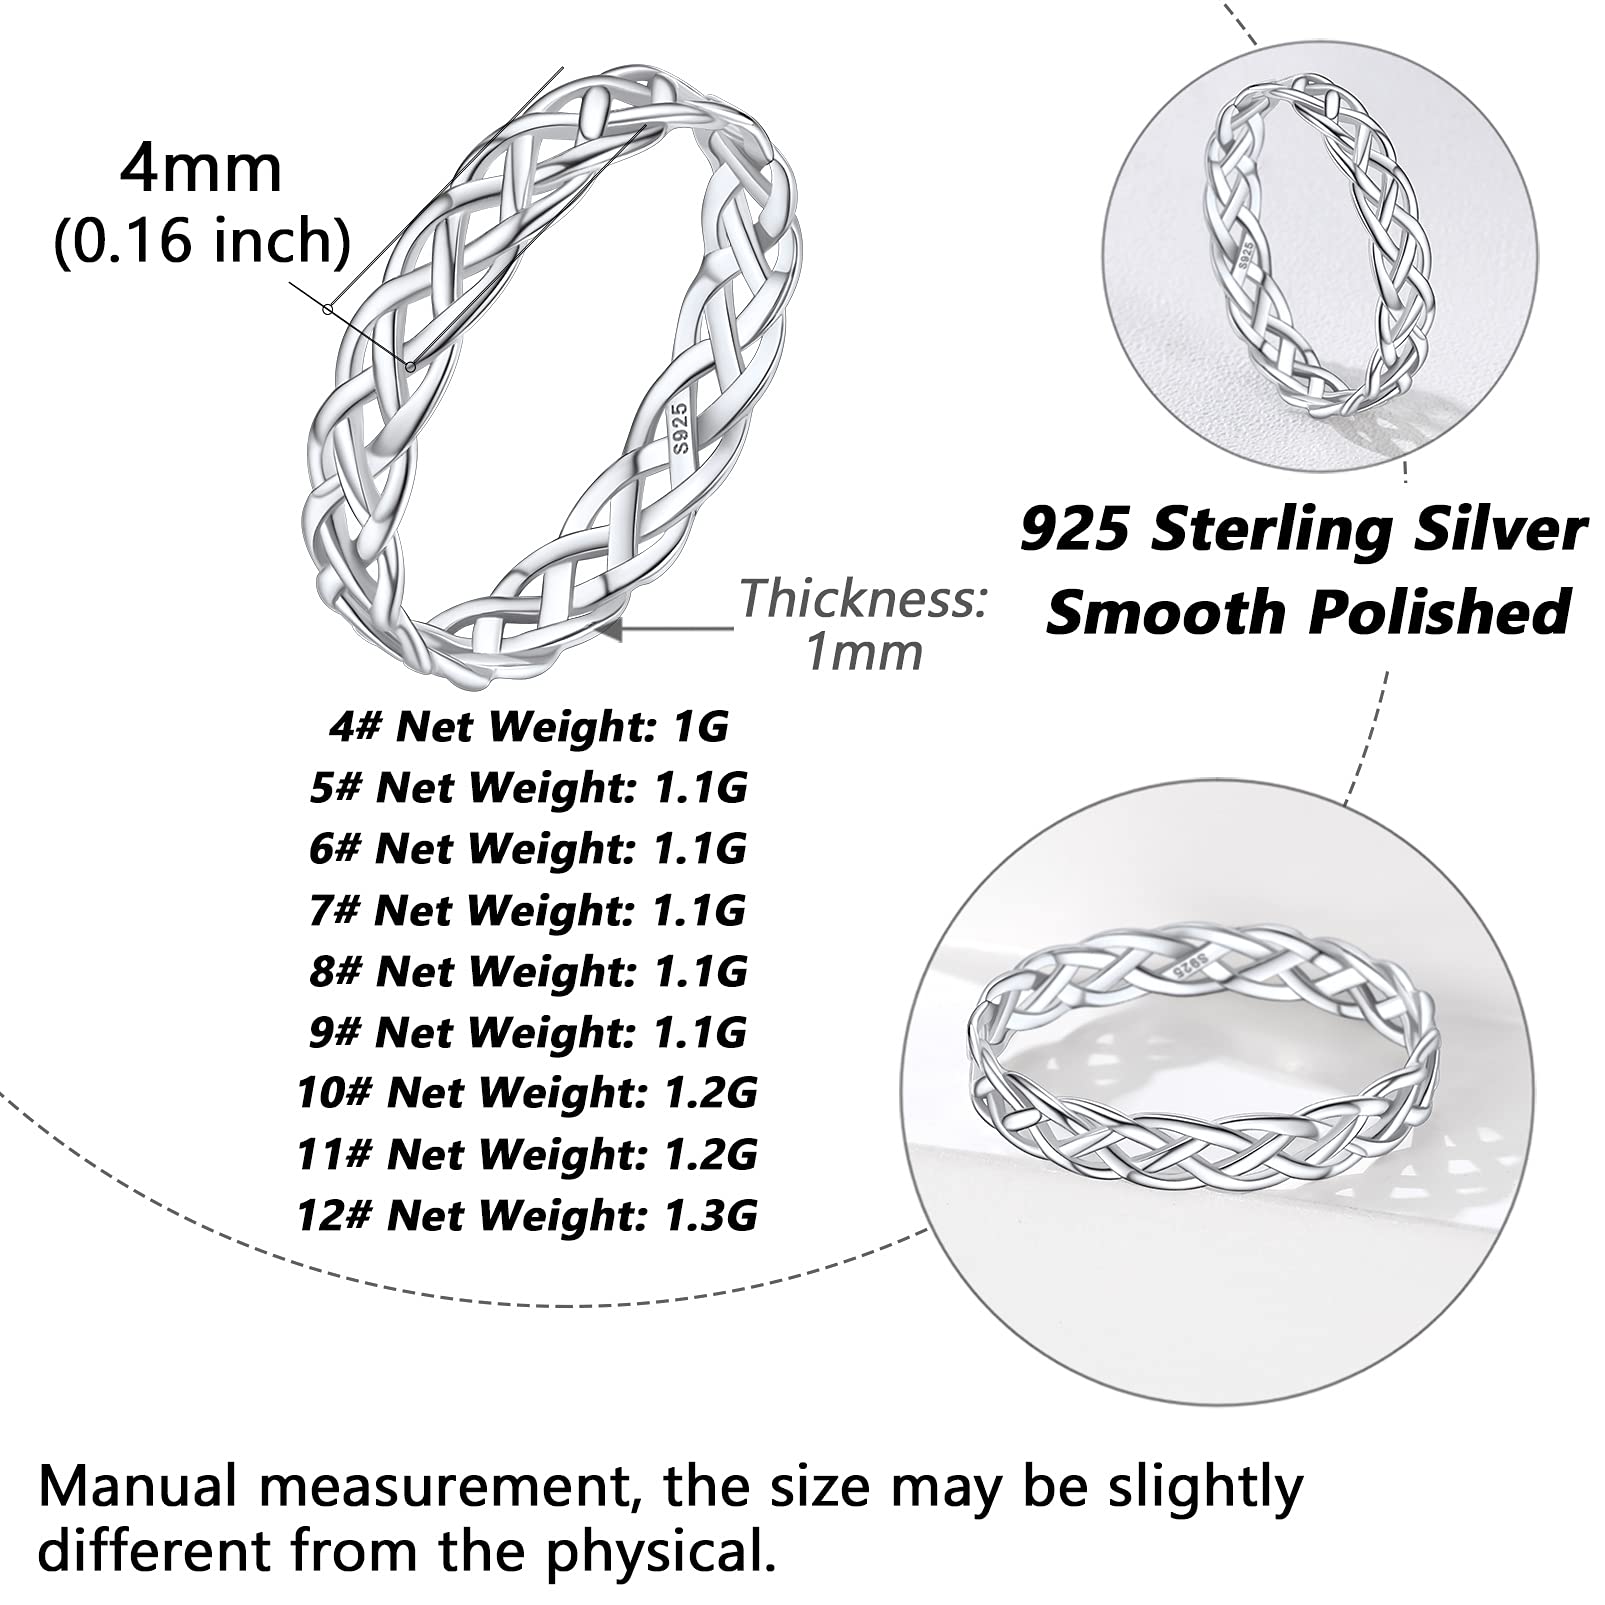 Silvora Sterling Silver Sturdy Celtic Knot/Cuban Link Chain Rings for Women Men Vintage Eternity Band Ring Jewelry Size 4-12